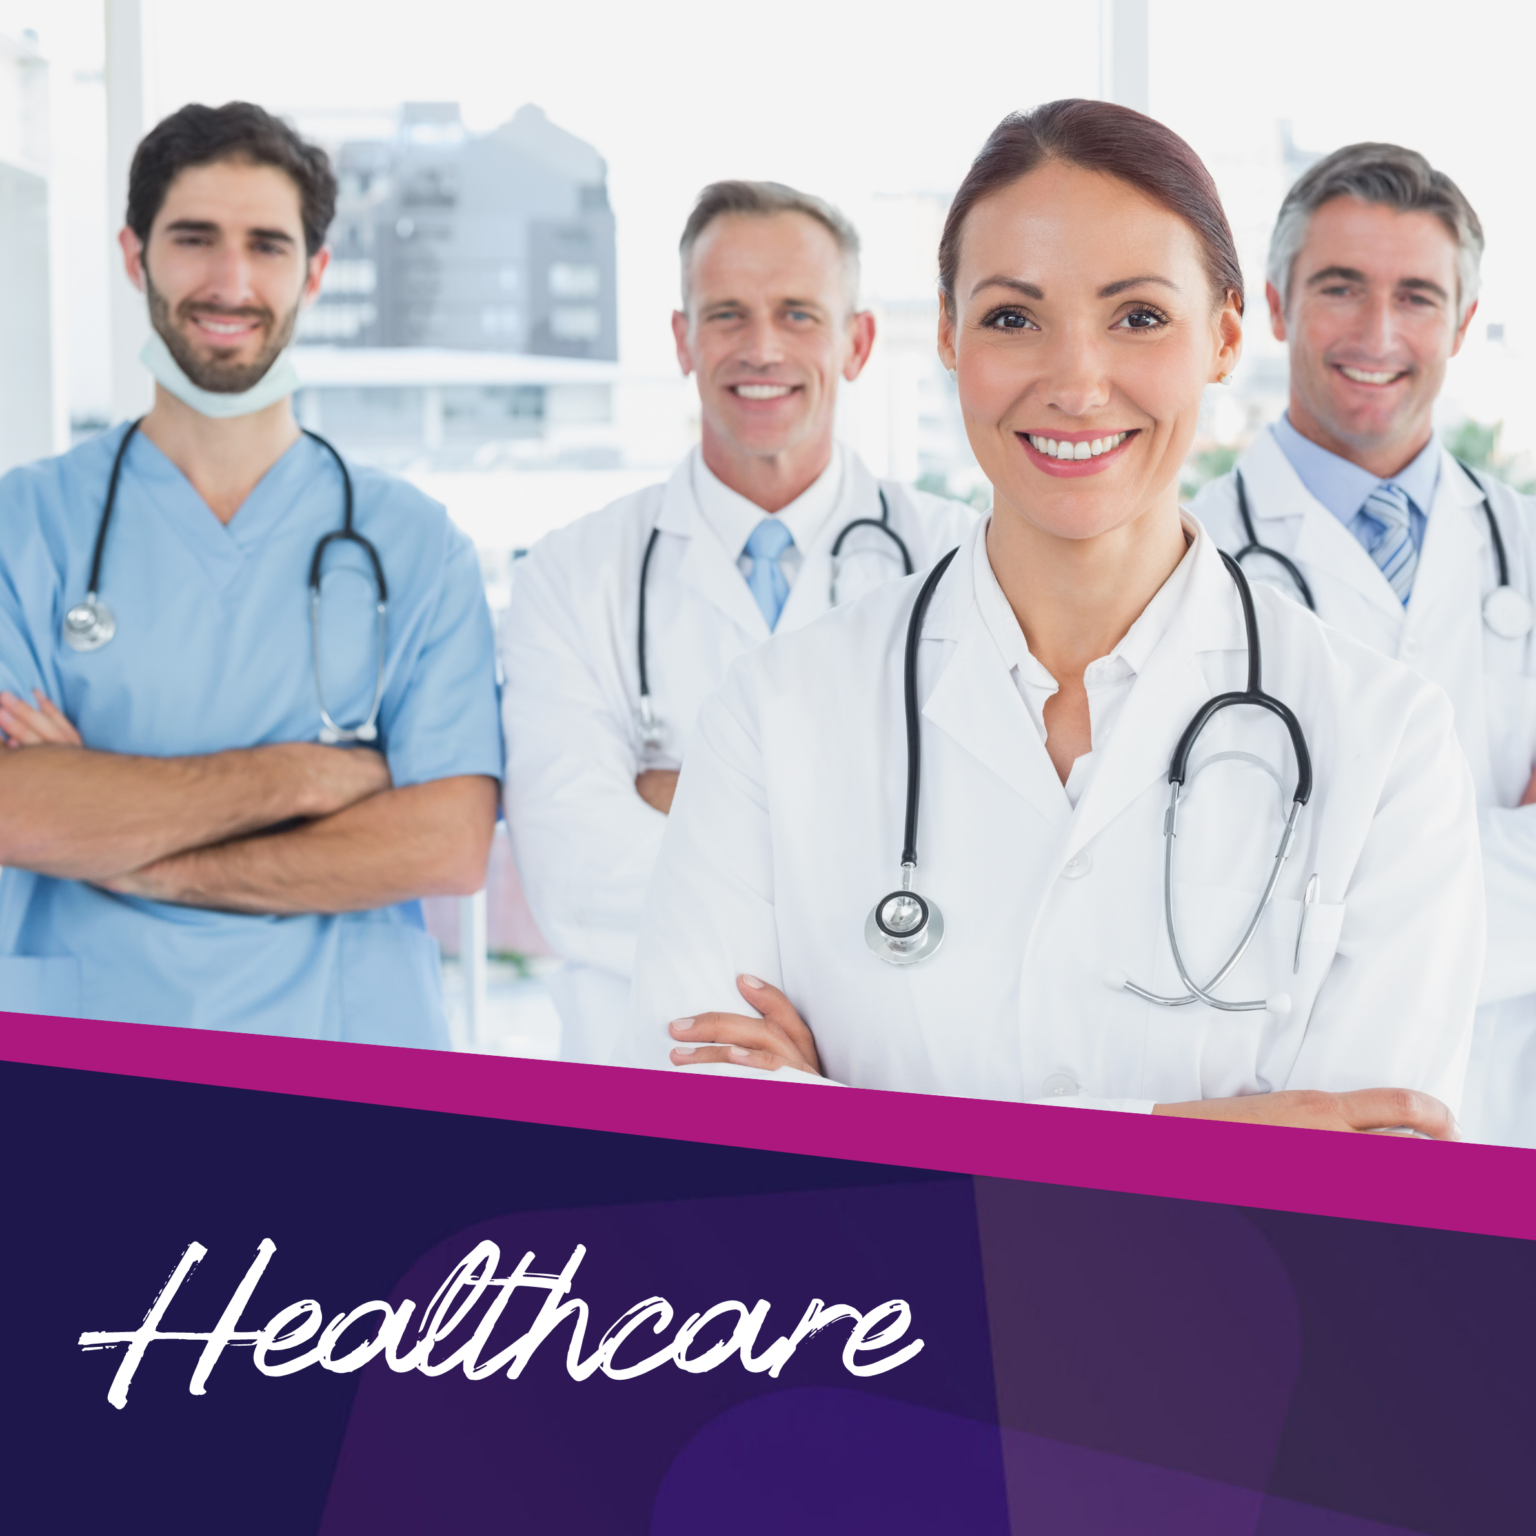 image for Healthcare community